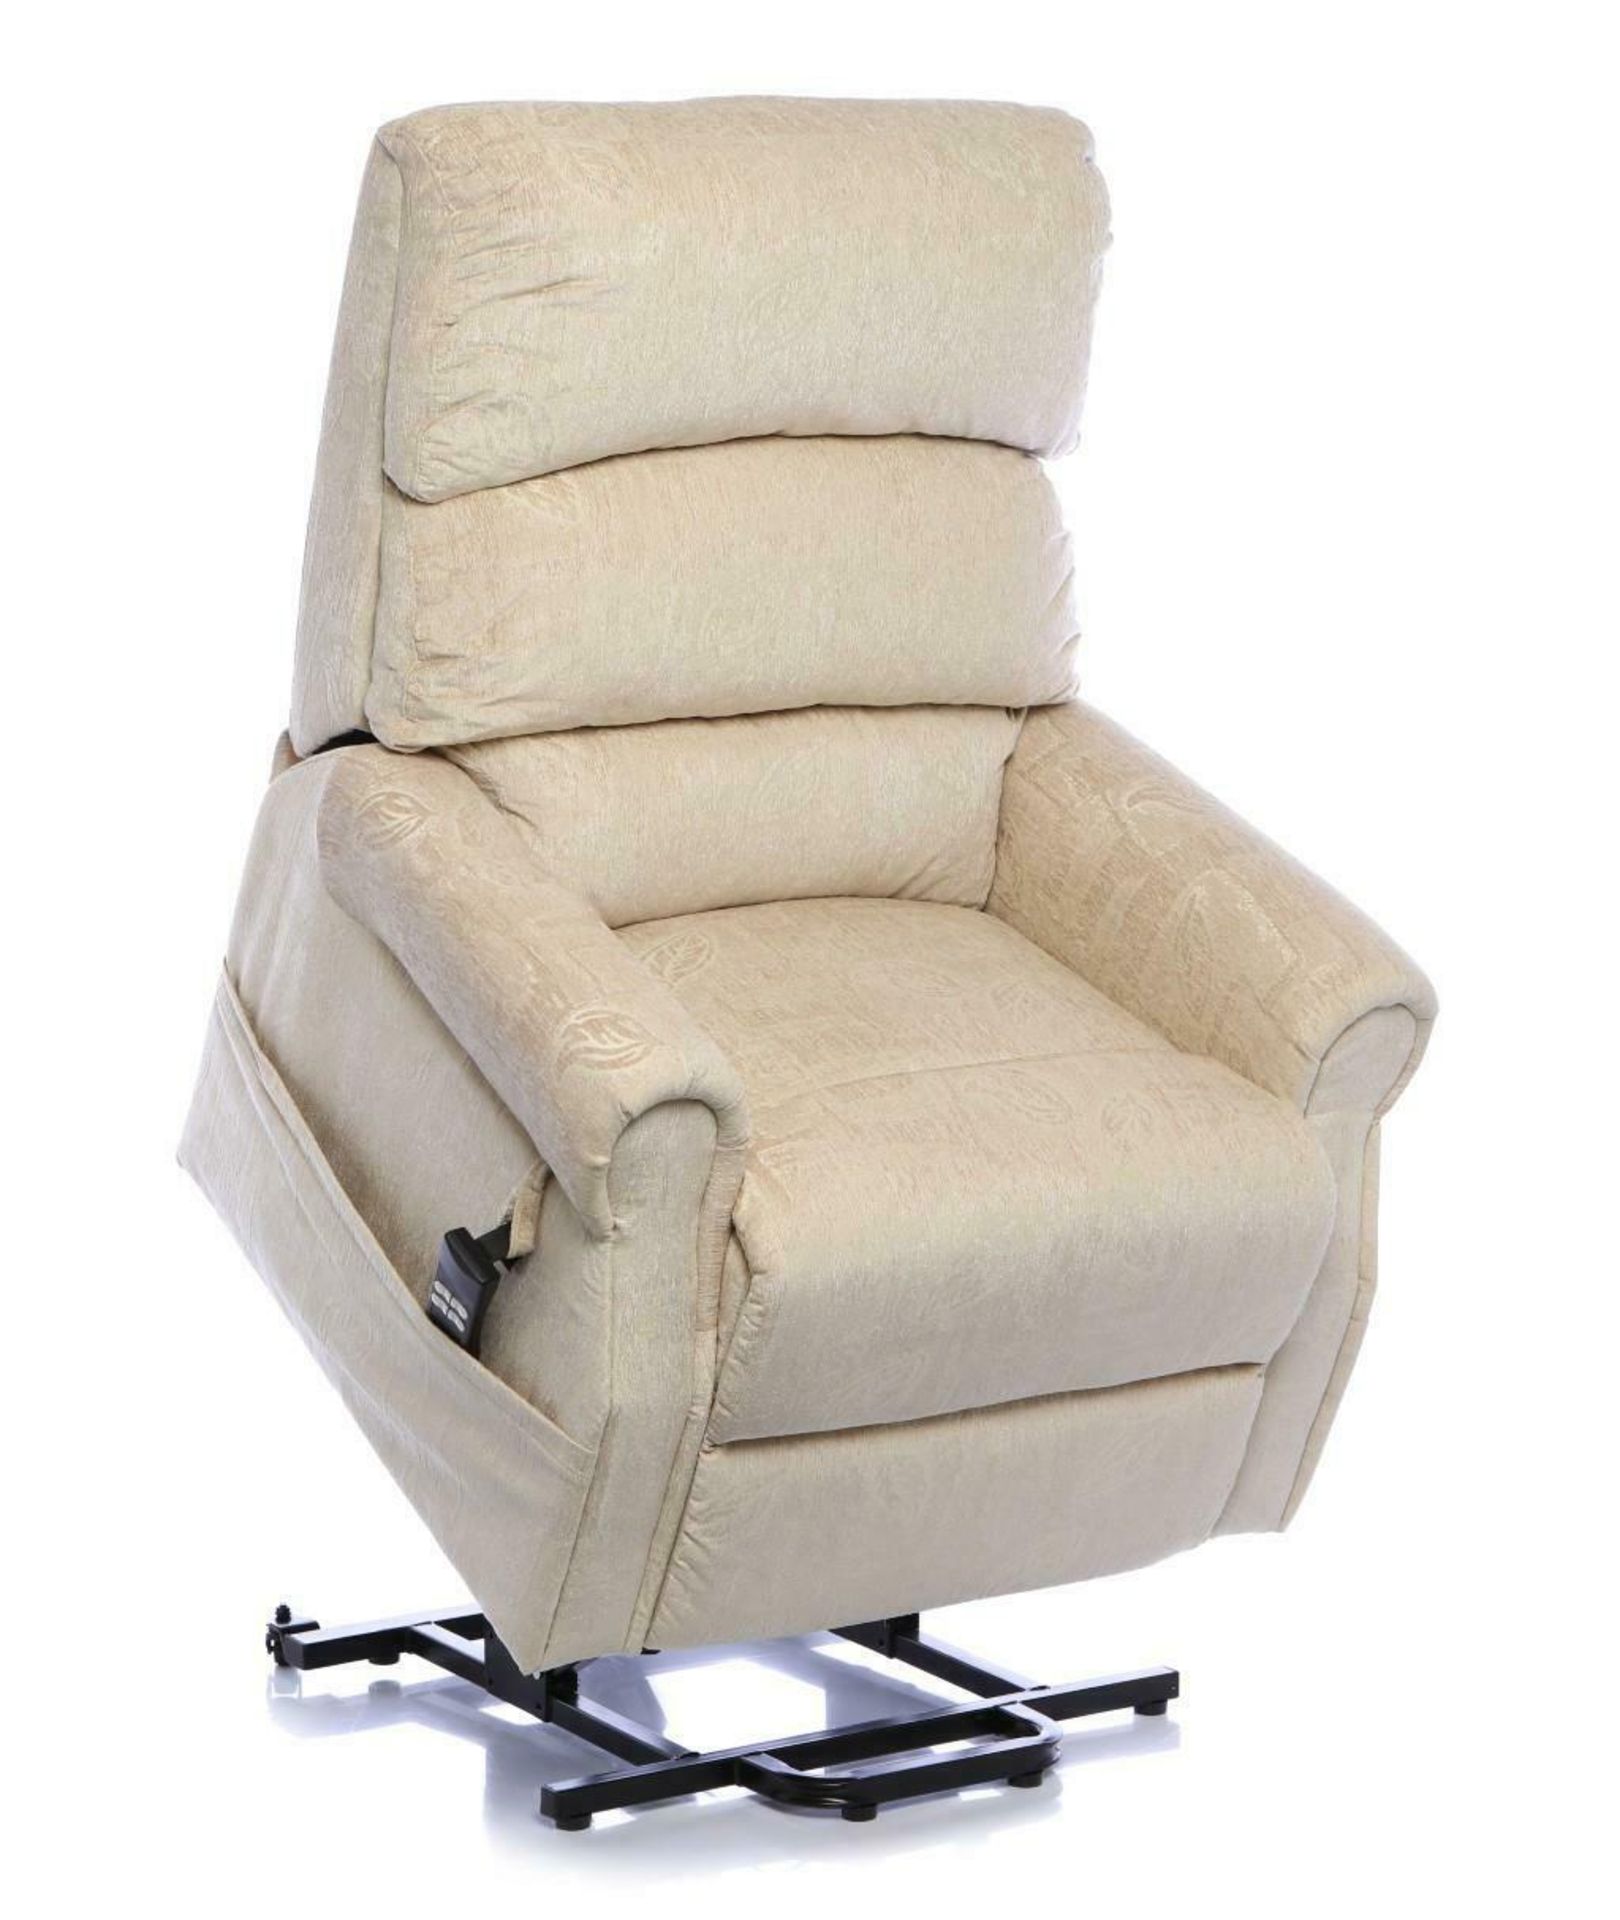 Brand new boxed Augusta rise and recliner electric chair in beige fabric - Image 2 of 2